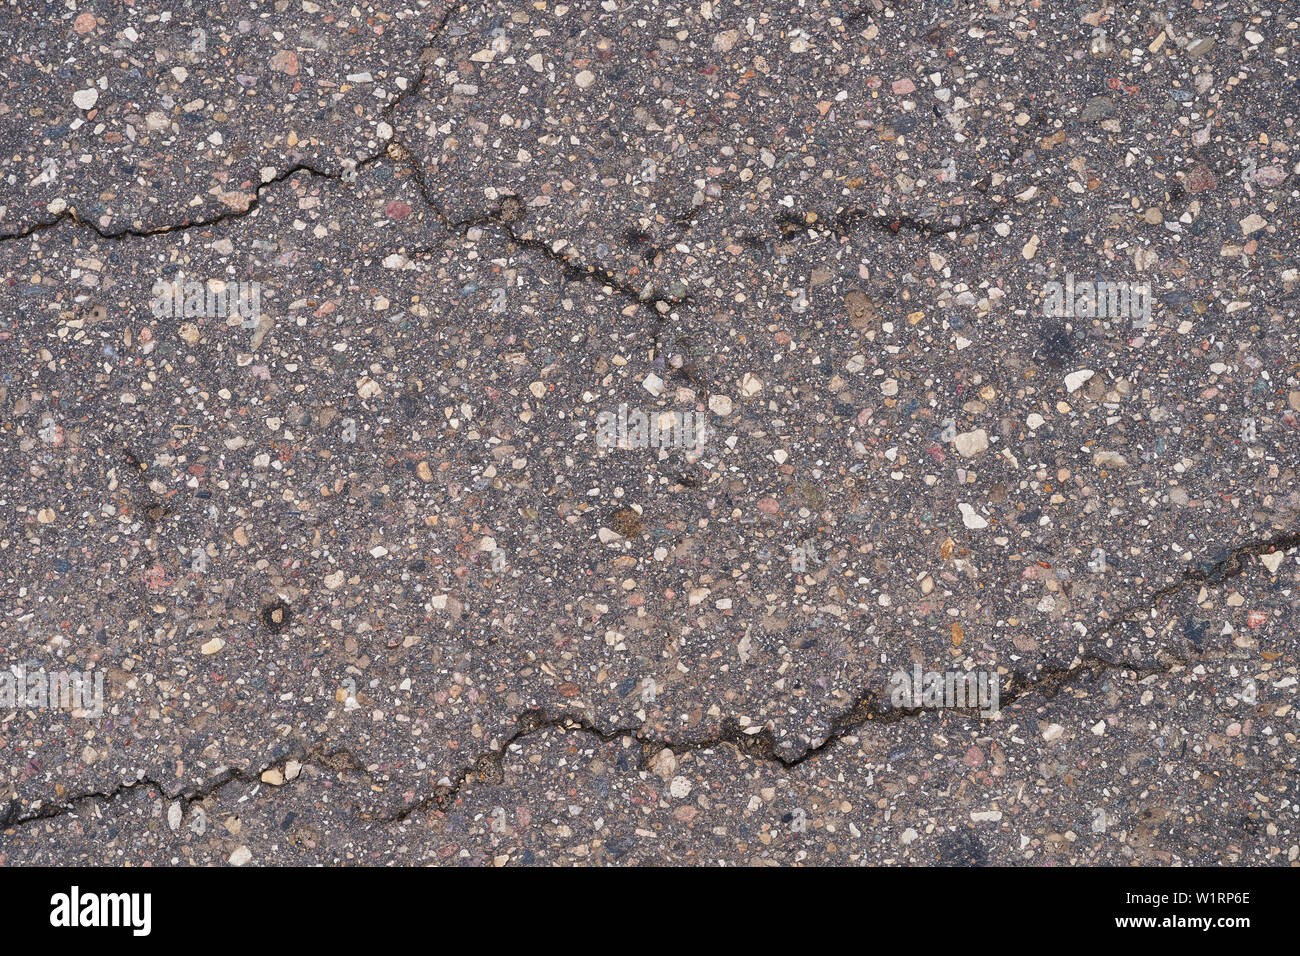 Asphalt road surface with small cracks and damages. Stock Photo